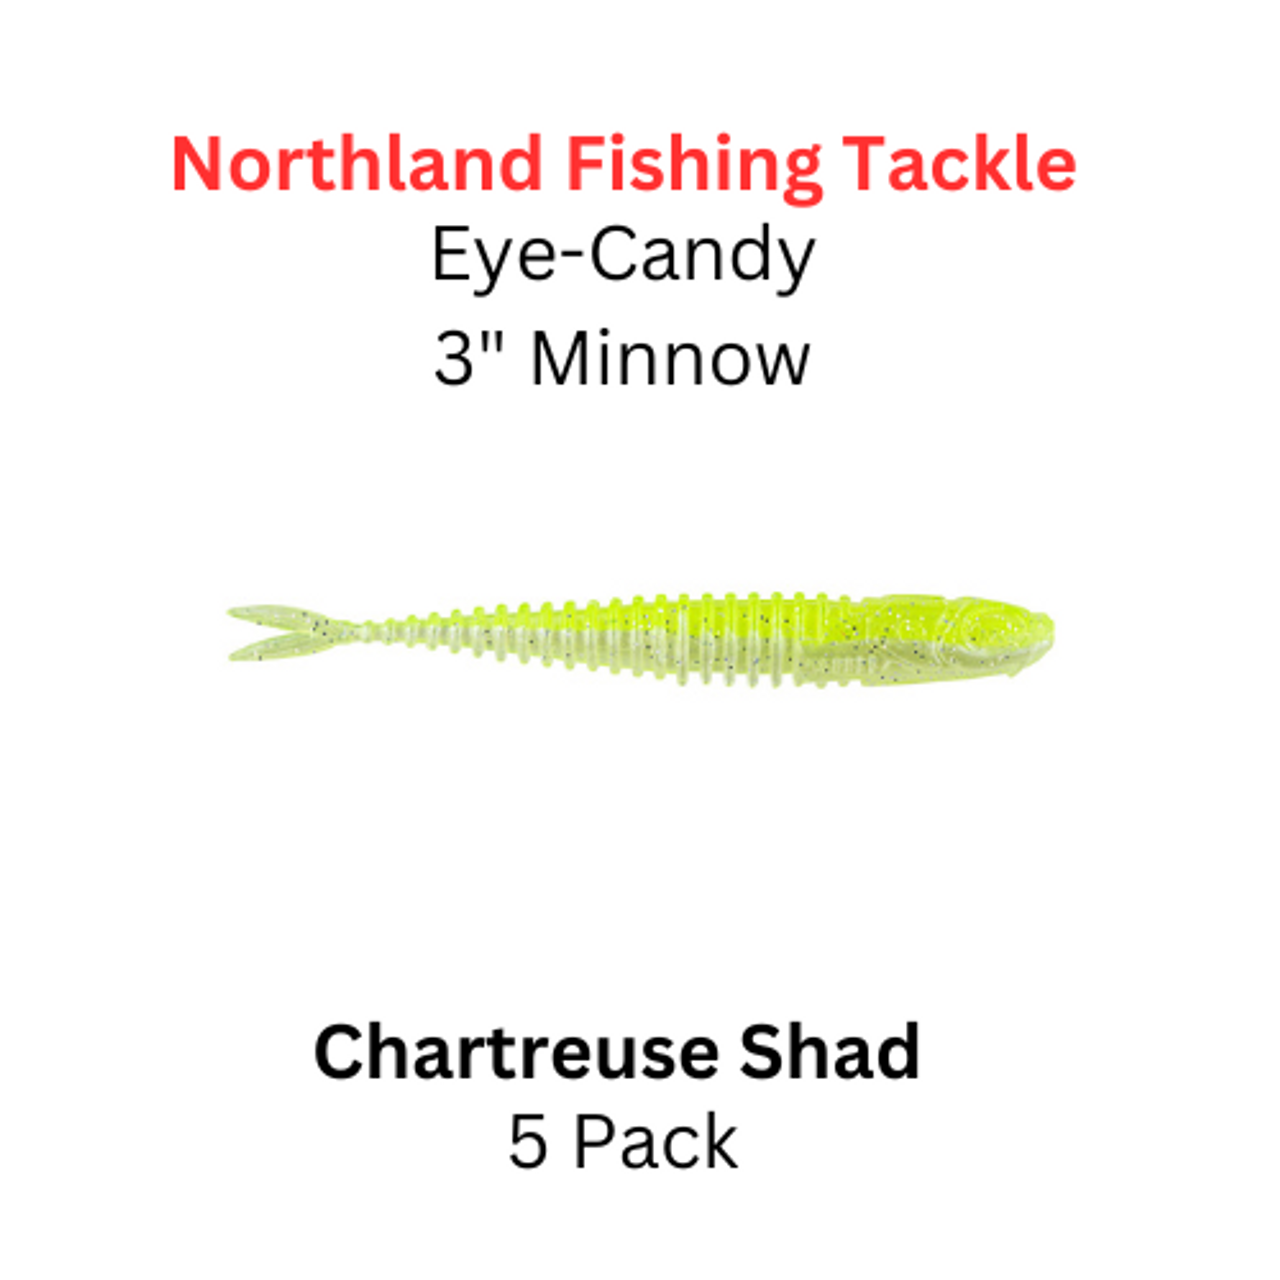 NORTHLAND FISHING TACKLE Eye Candy 3 Minnow Chartreuse Shad